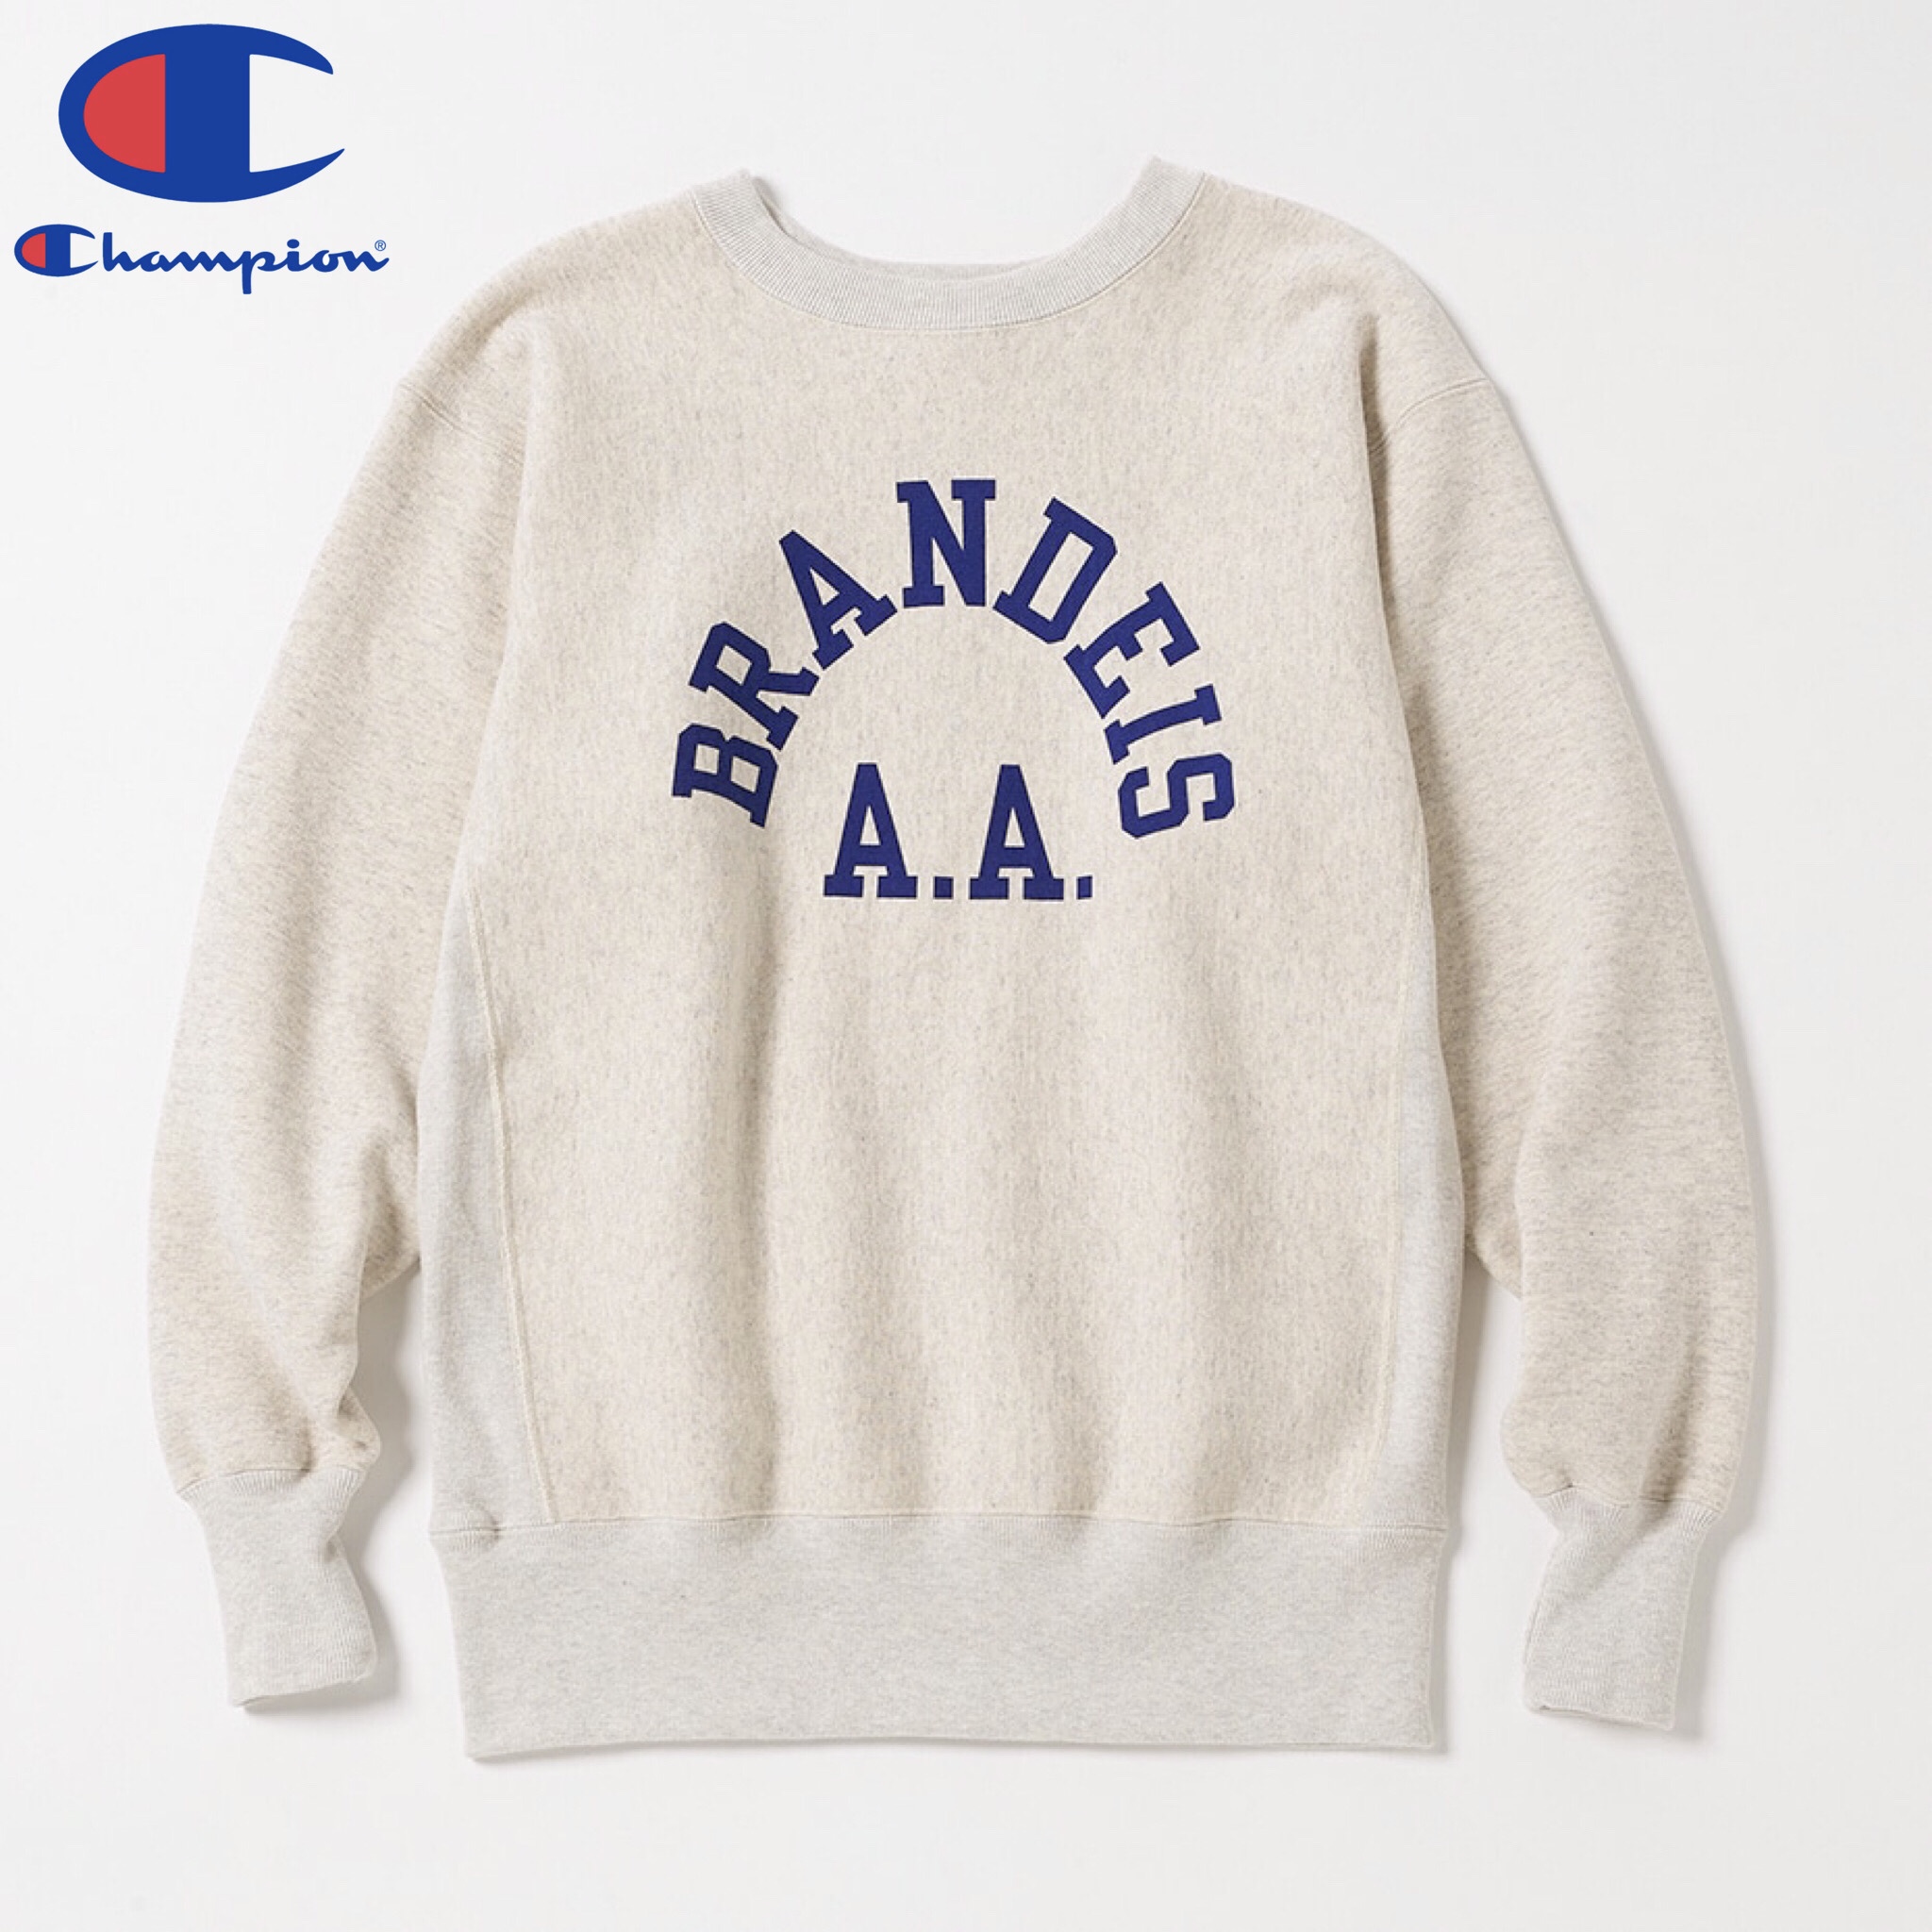 Champion TRUE TO ARCHIVES C3-W033 “REVERSE WEAVE 2...